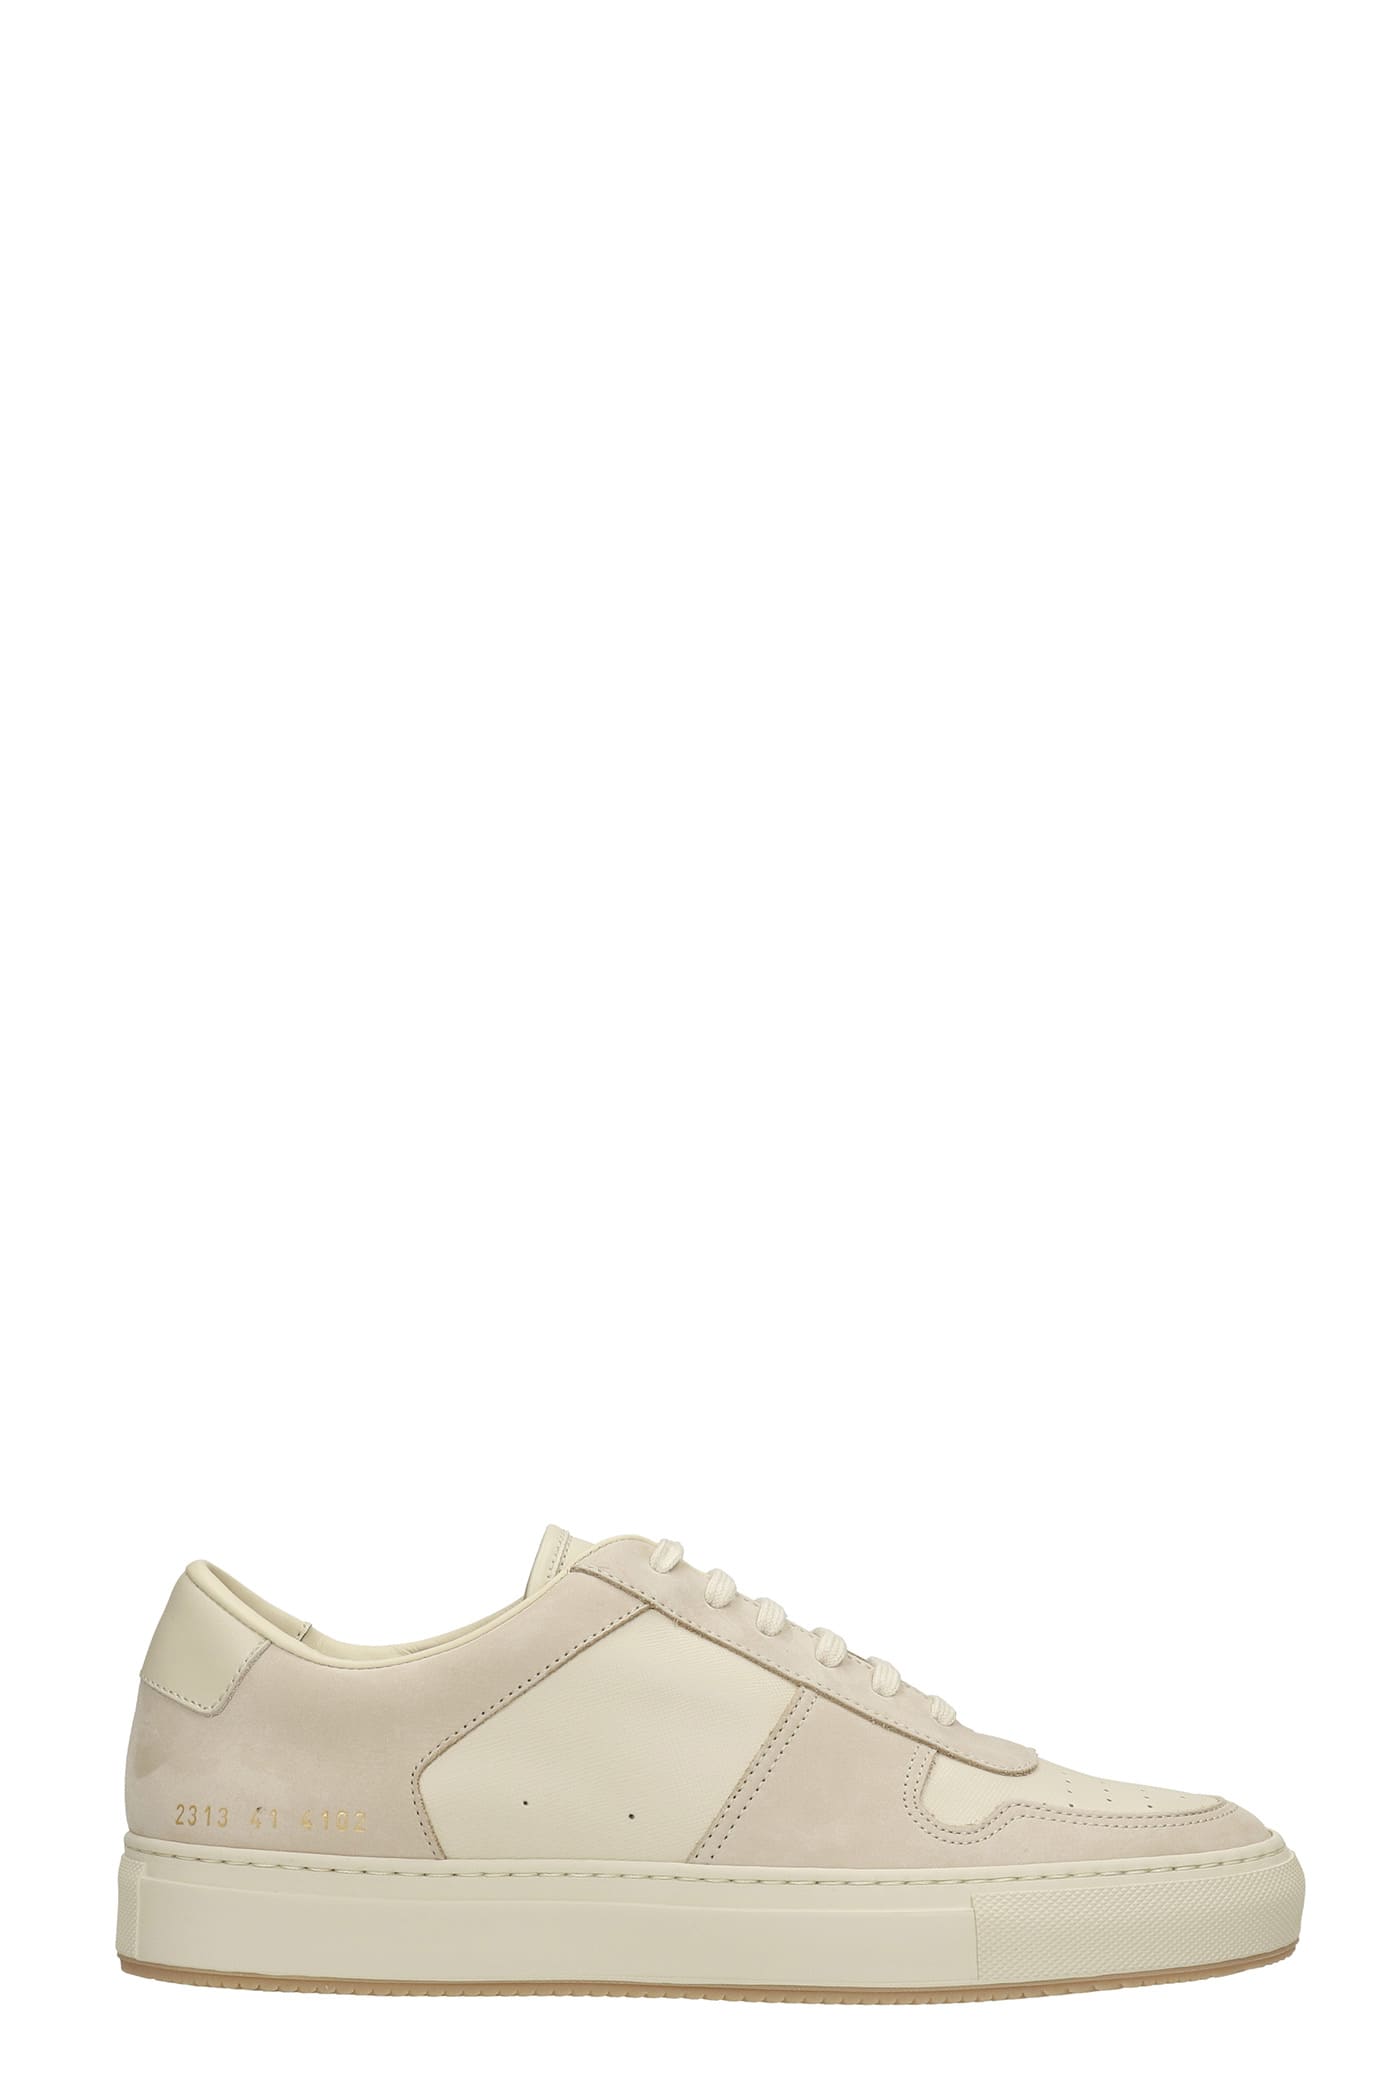 Common Projects Bball Low Sneakers In Beige Leather And Fabric